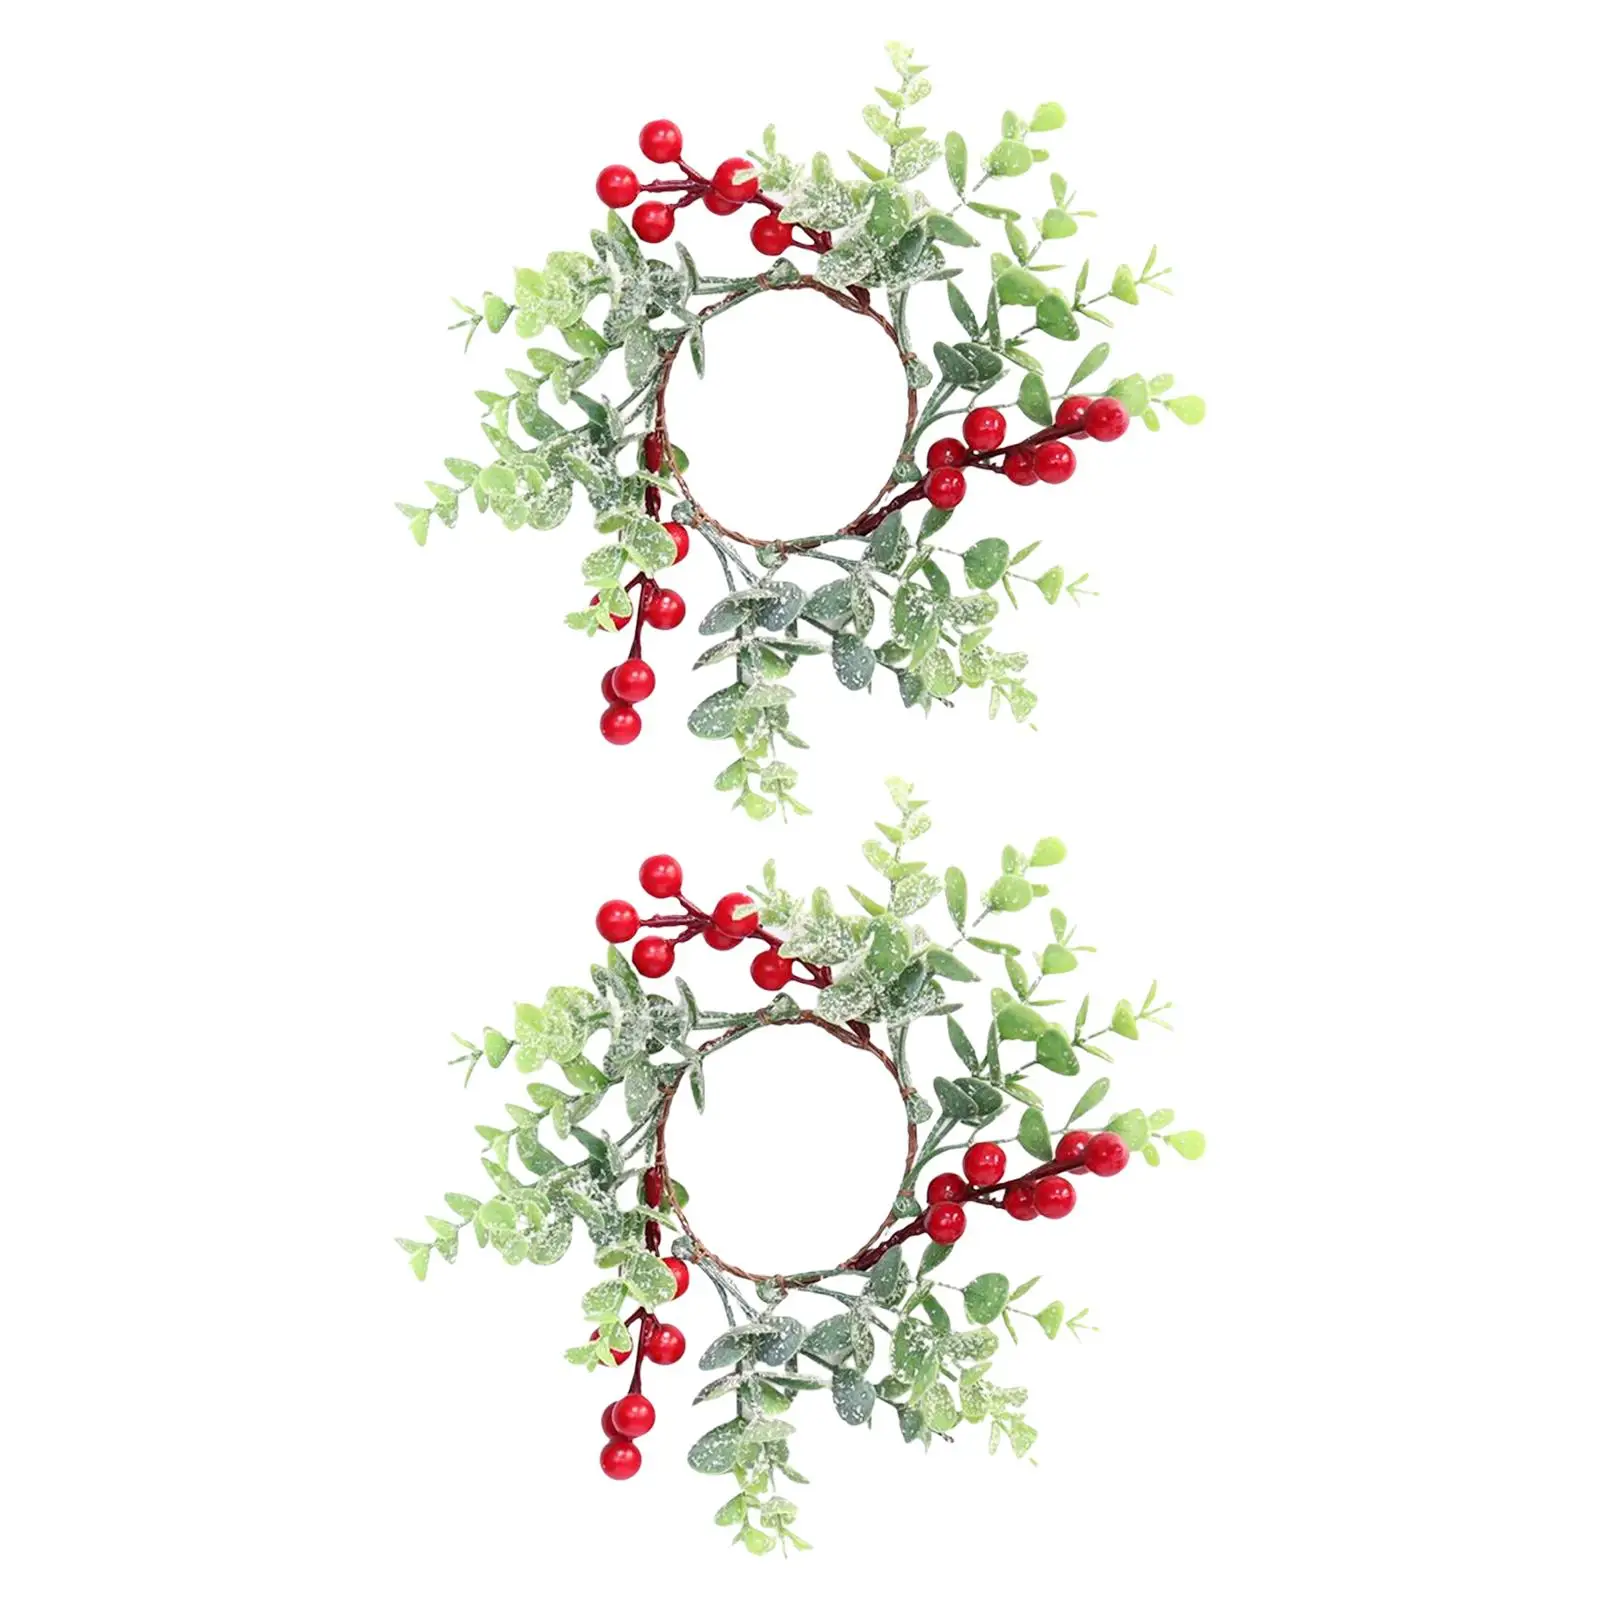 2 Pieces Easter Candle Rings Rustic Candles Holder Simulated Wreath for Living Room Home Decorations Holiday Festivals Fireplace